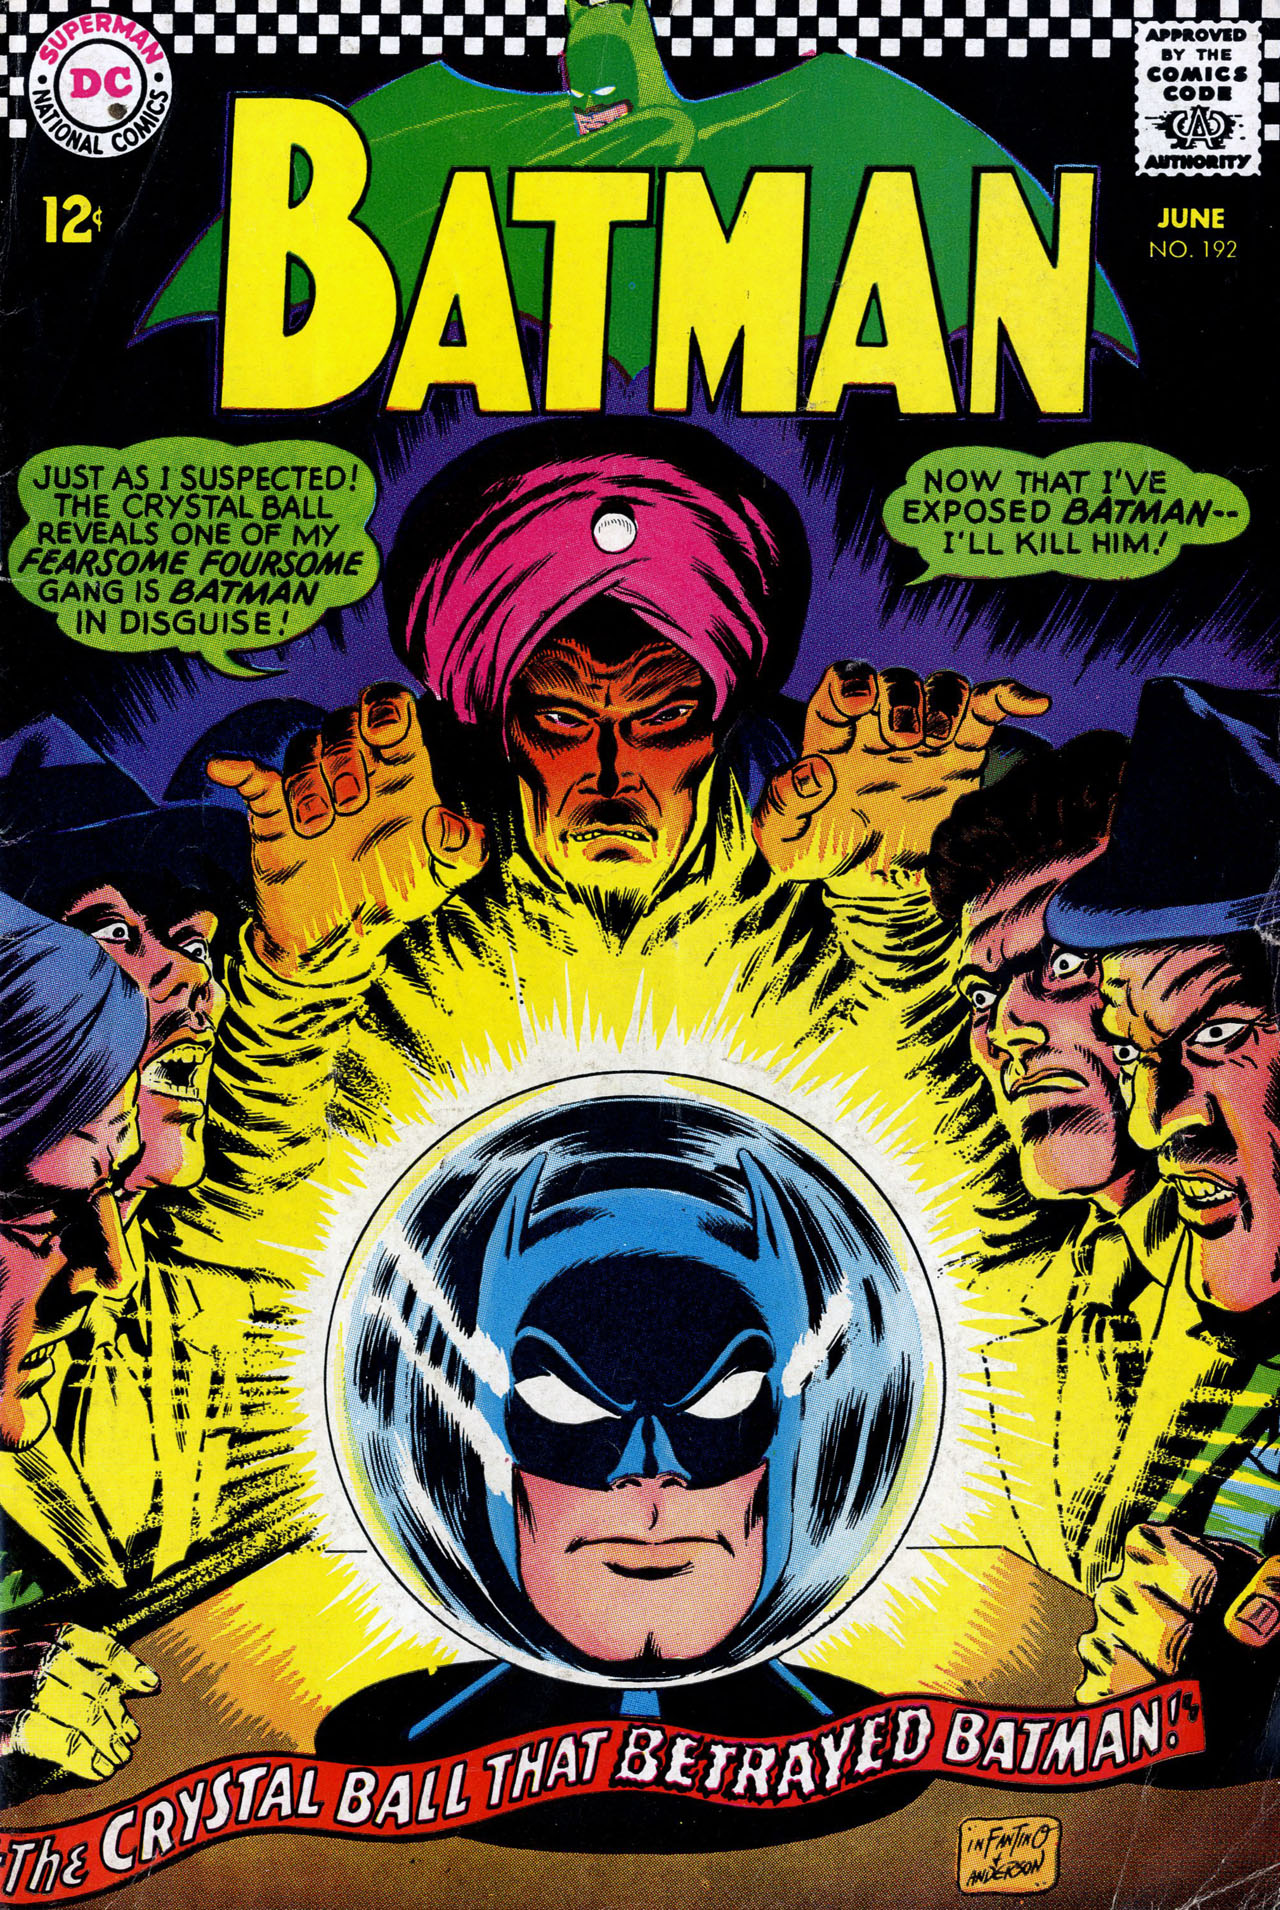 Batman 1940 Issue 192 | Read Batman 1940 Issue 192 comic online in high  quality. Read Full Comic online for free - Read comics online in high  quality .| READ COMIC ONLINE